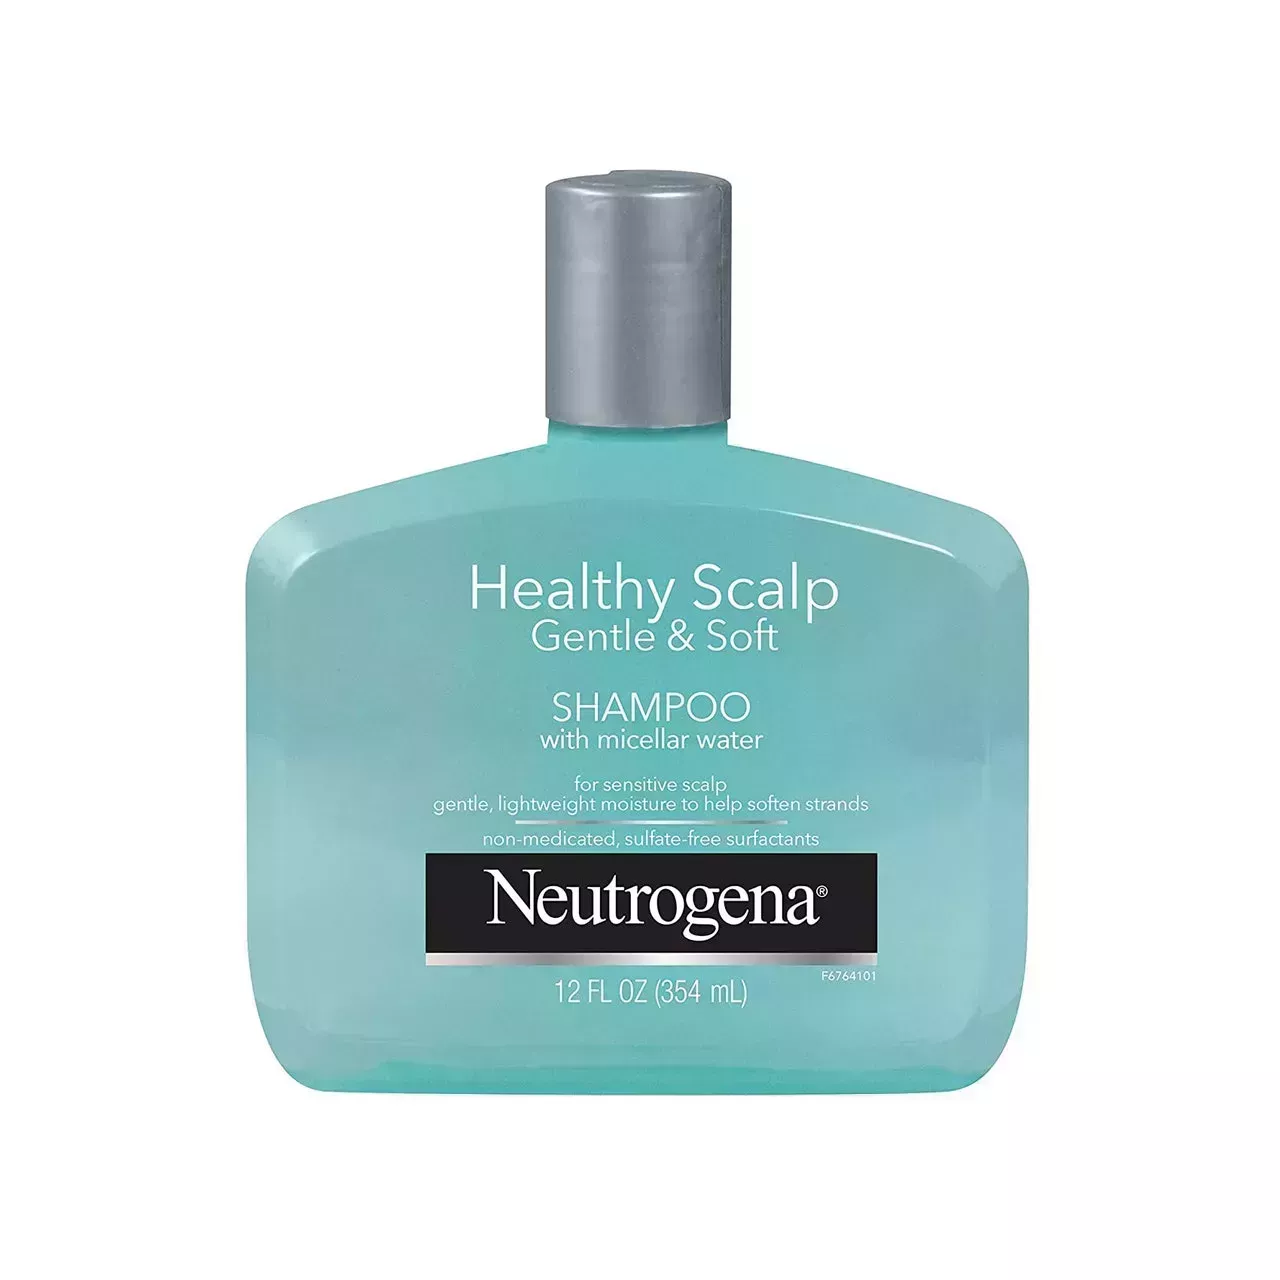 Neutrogena Gentle & Soft Healthy Scalp Shampoo for Sensitive Scalp wide mint bottle of shampoo with gray cap on white background